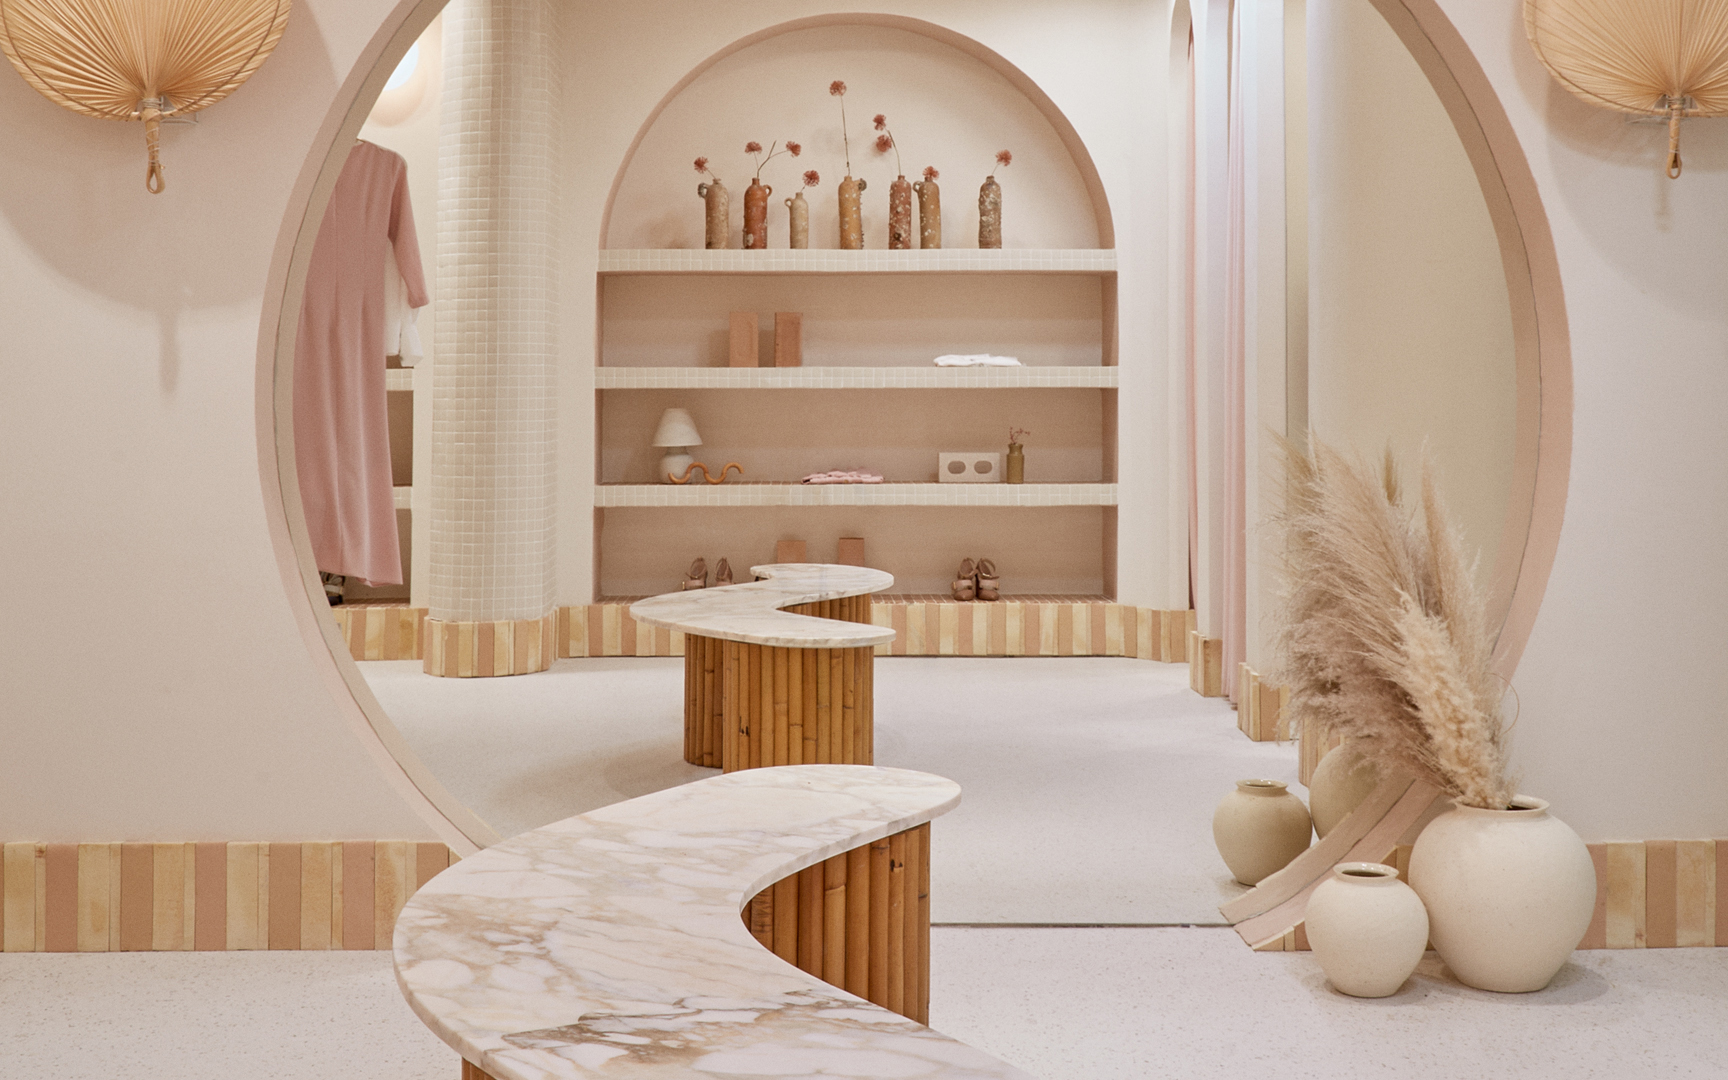 An&Be store in Madrid. Fashion & architecture interact, narrating a story of tradition and innovation